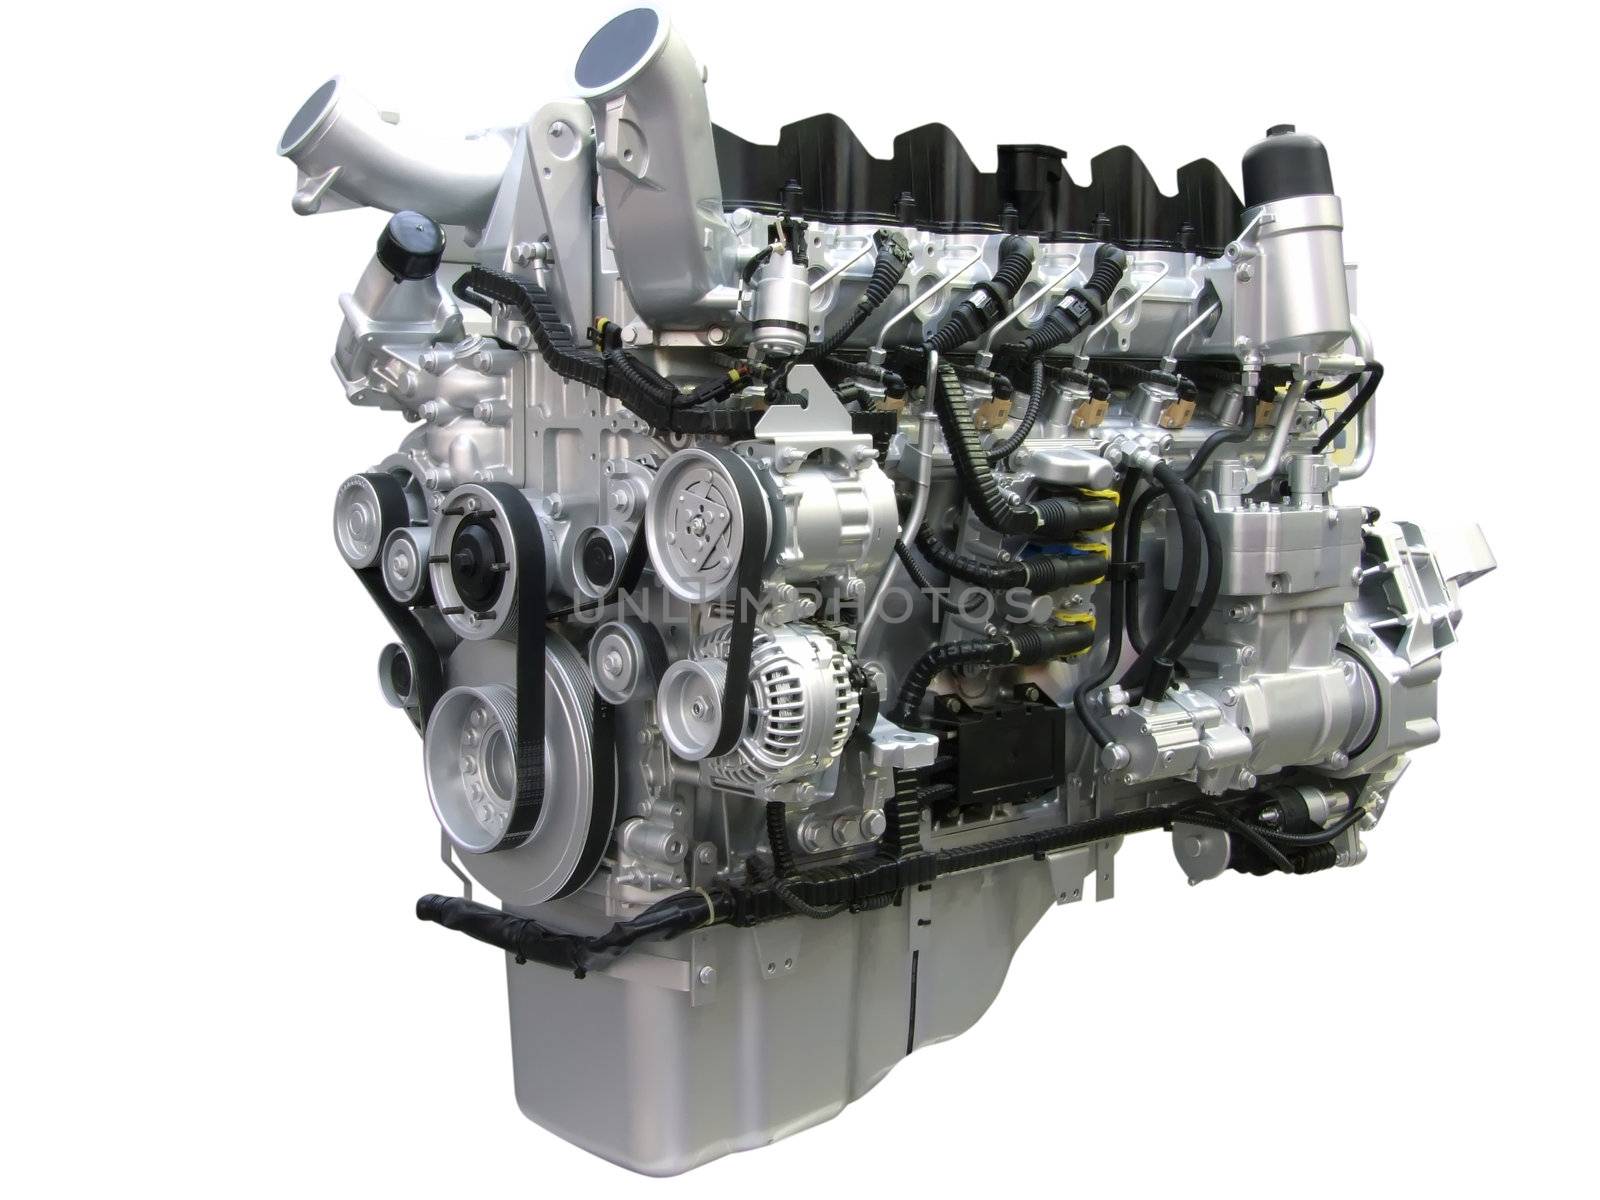 truck engine by goce